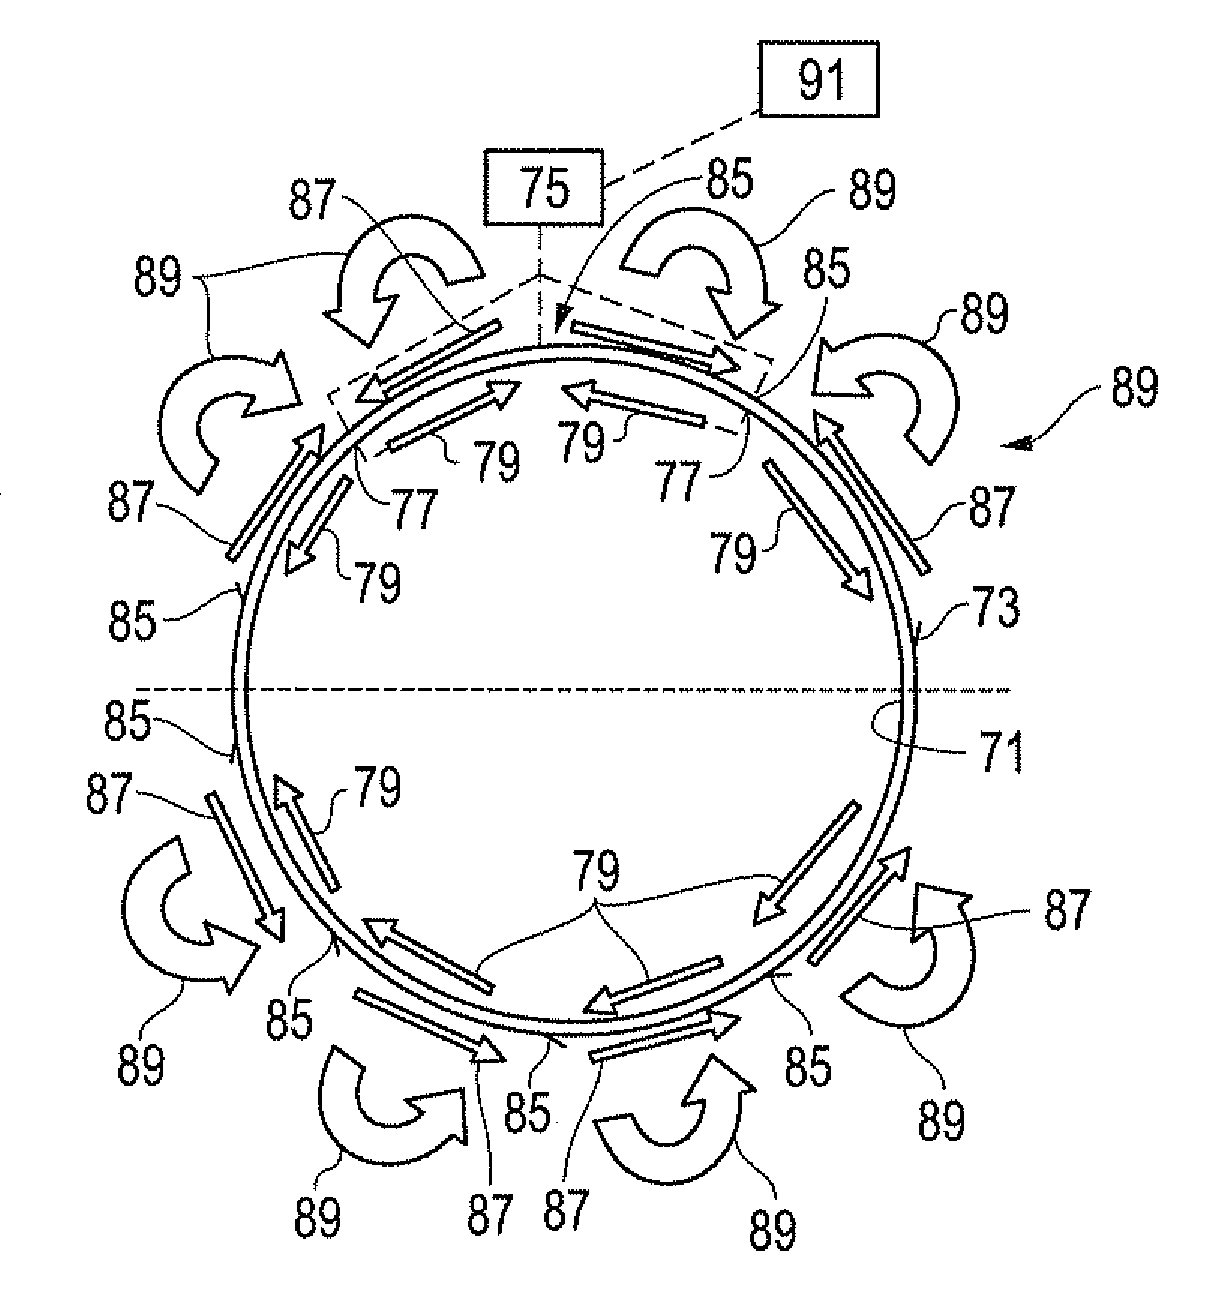 System, method and apparatus for fluidic effectors for enhanced fluid flow mixing